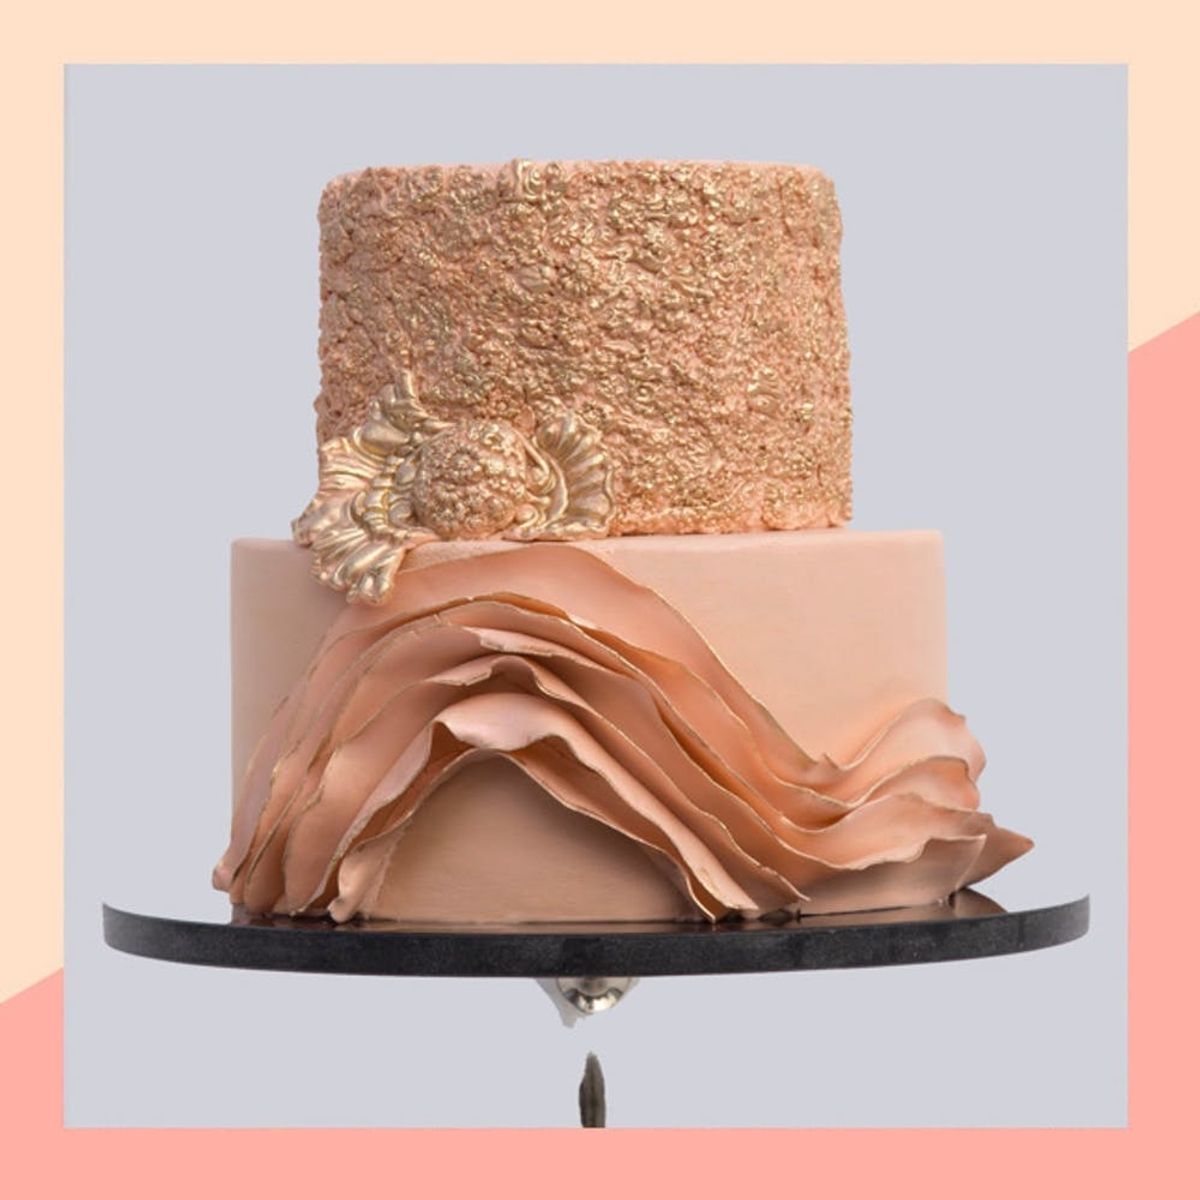 These Runway-Inspired Cakes Add a Stylish Element to Your Wedding